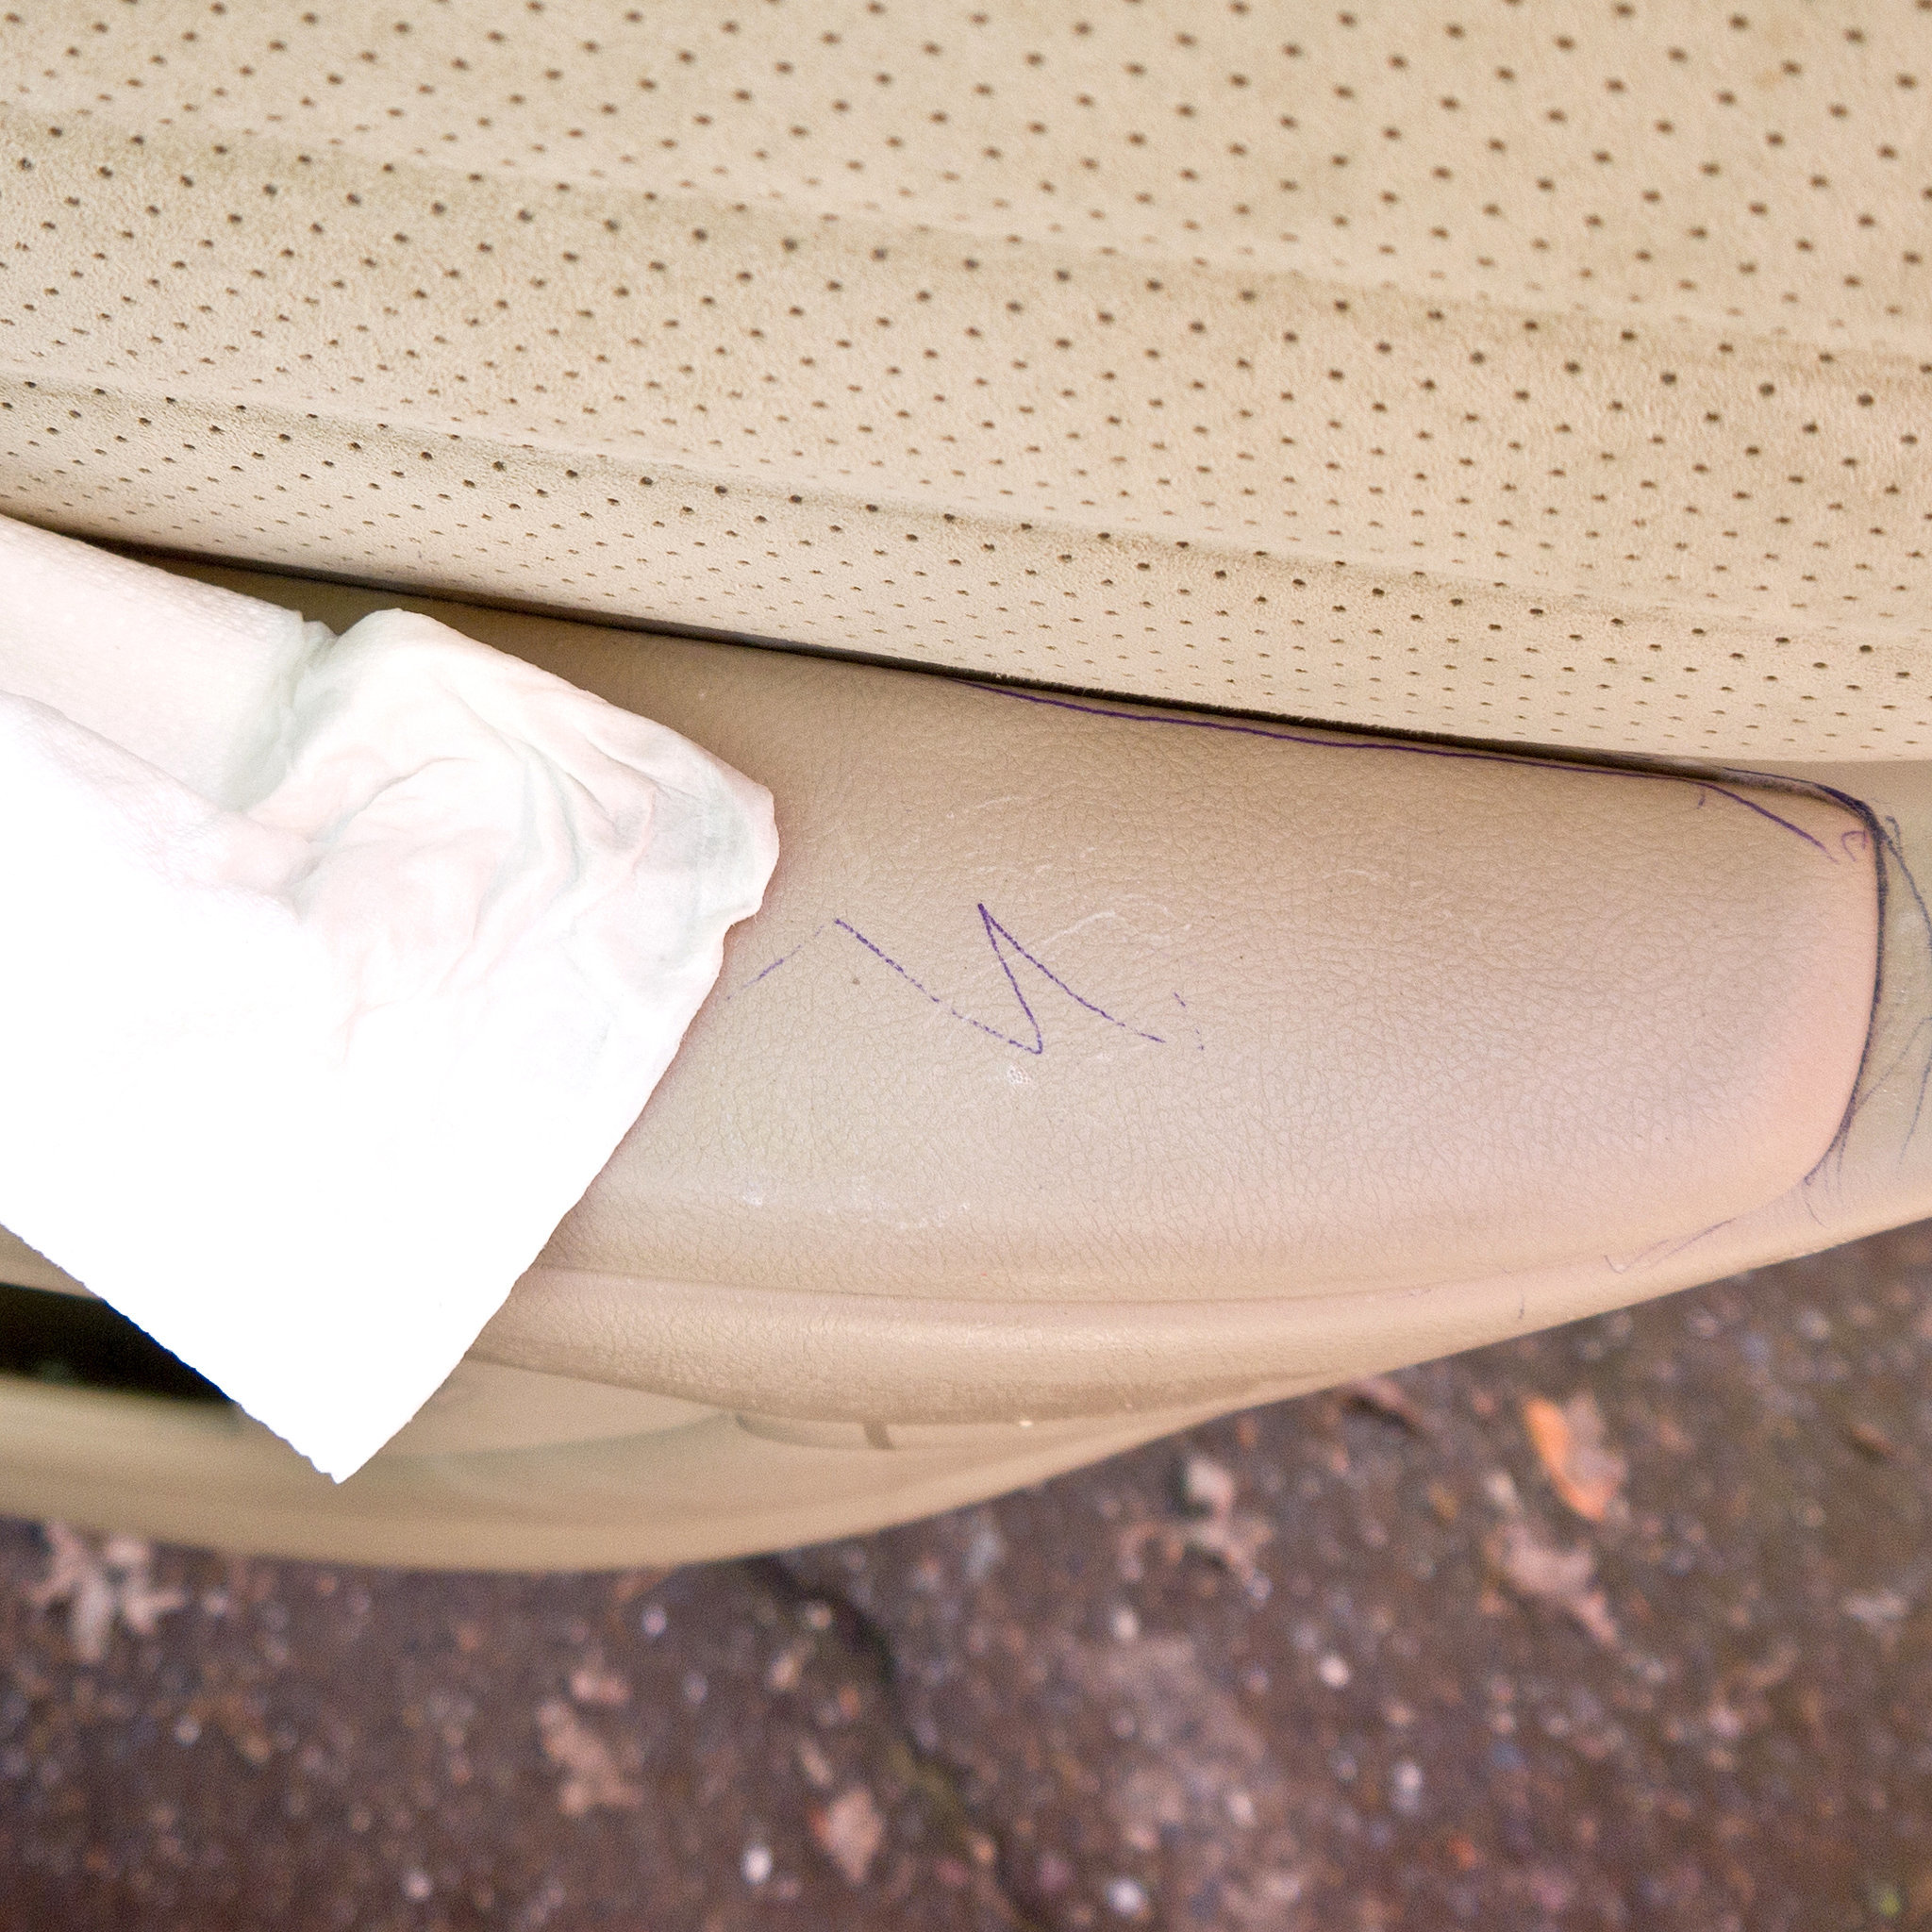 Remove Pen Marks From Car Interior, How To Clean Pen Off Leather